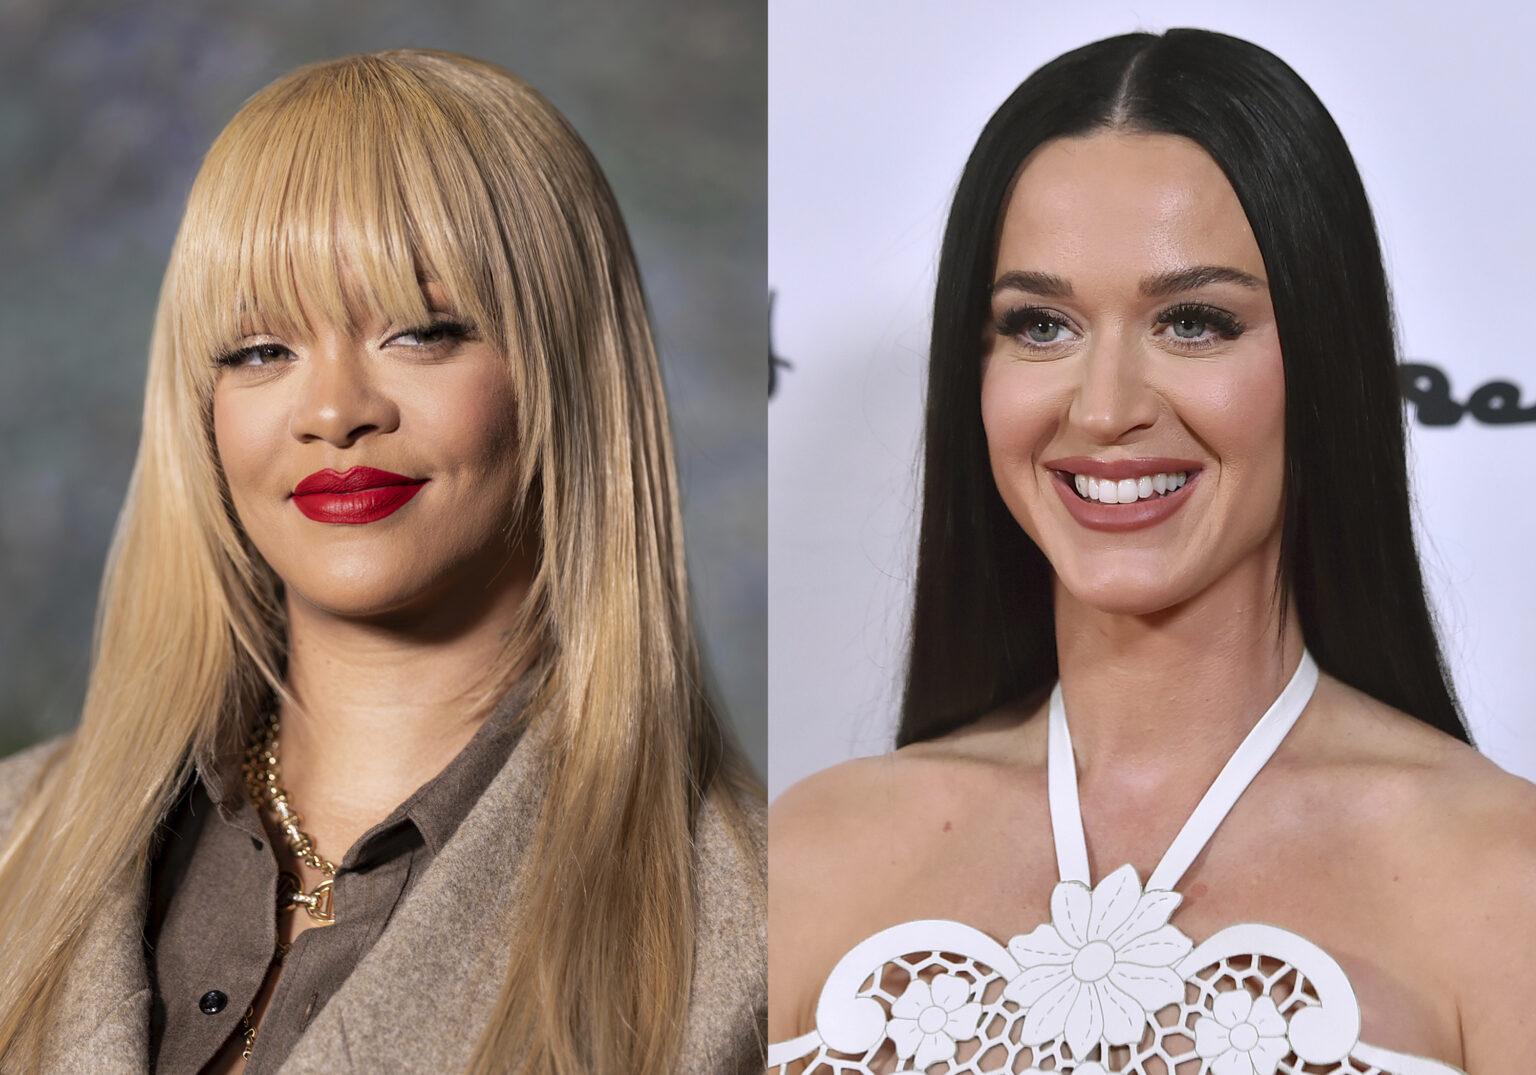 Katy Perry and Rihanna go viral with AI Met Gala gowns